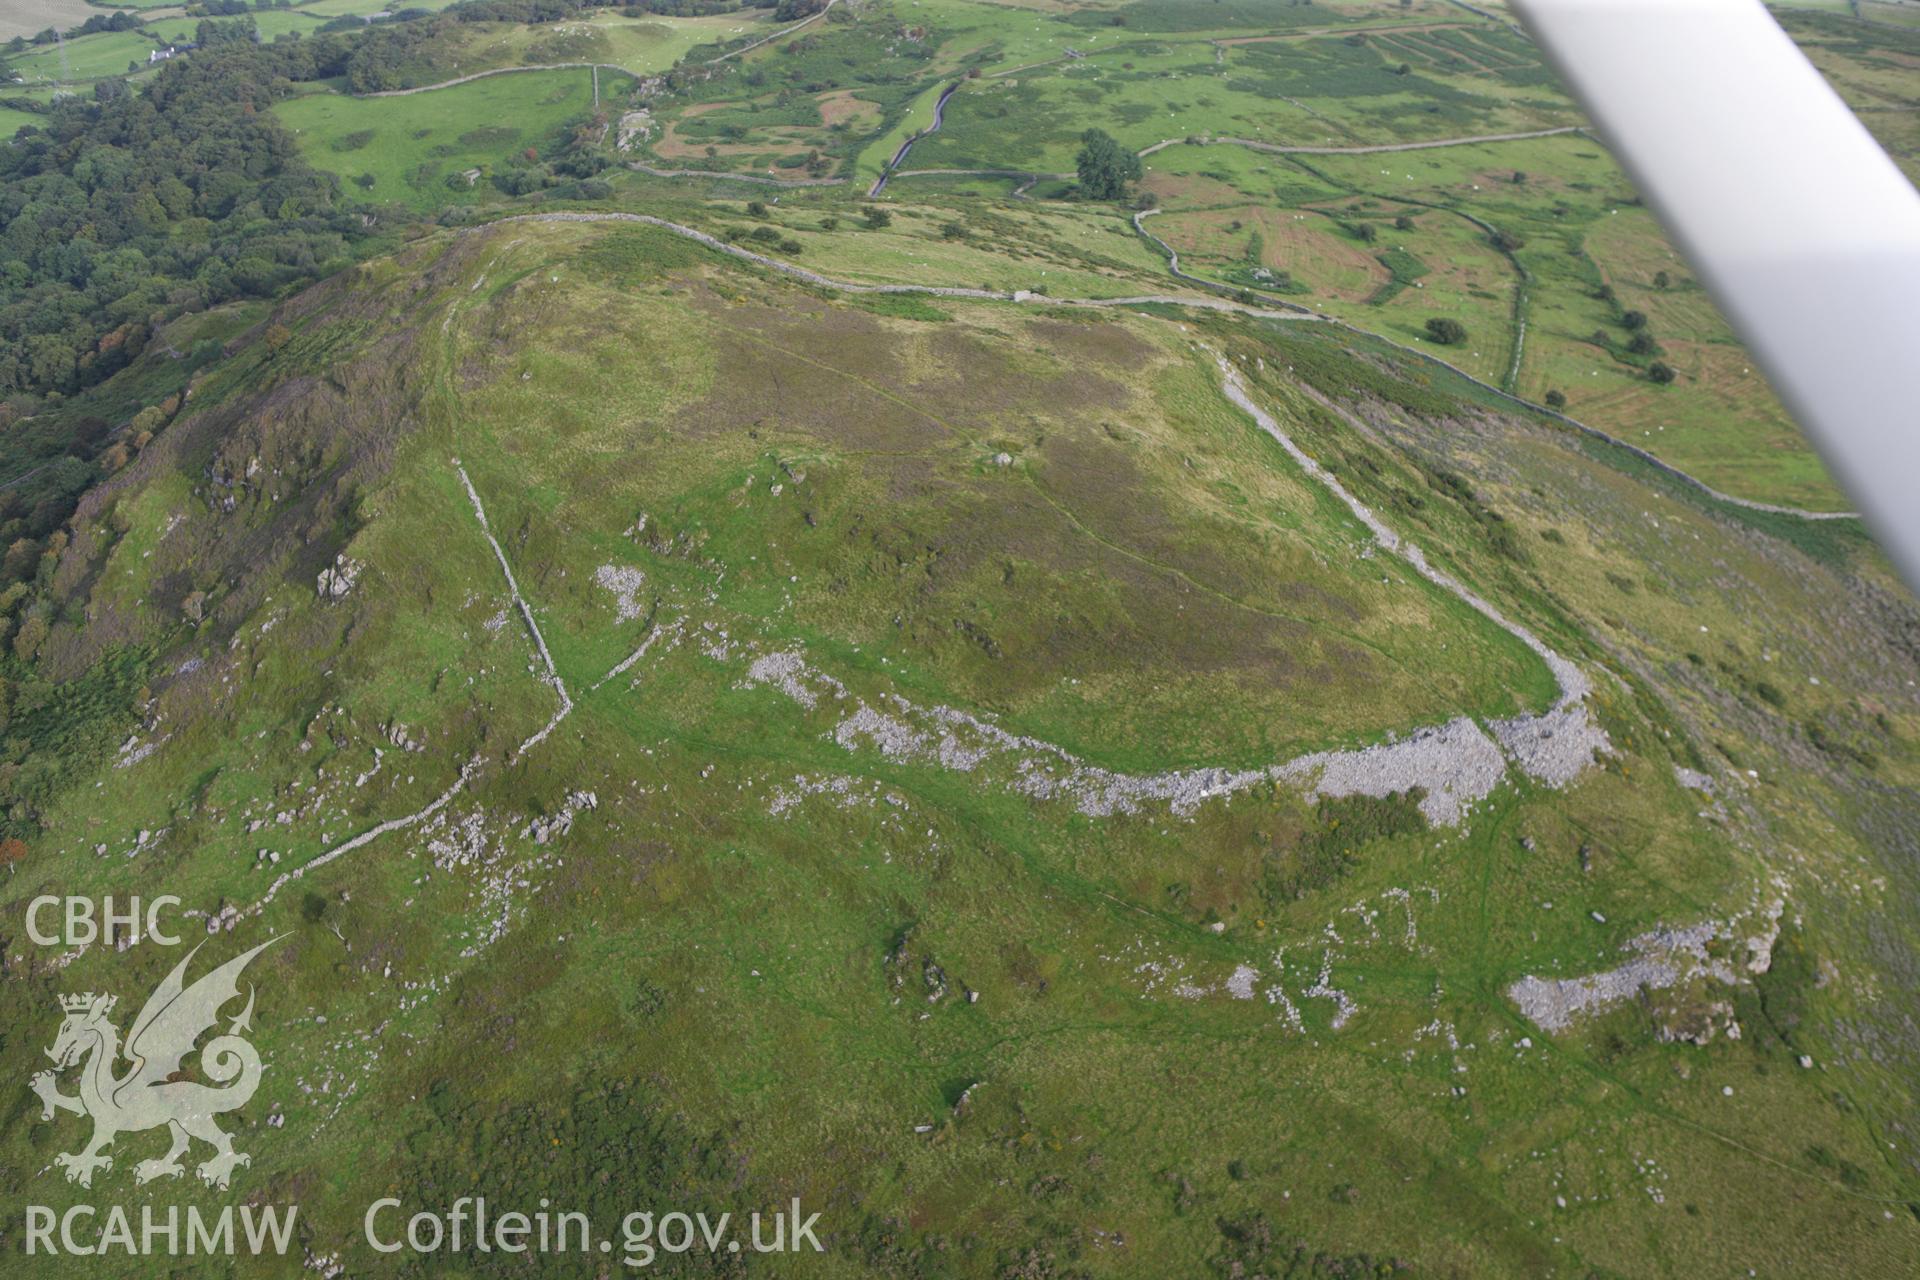 RCAHMW colour oblique aerial photograph of Pen-y-Gaer Hillfort. Taken on 06 August 2009 by Toby Driver